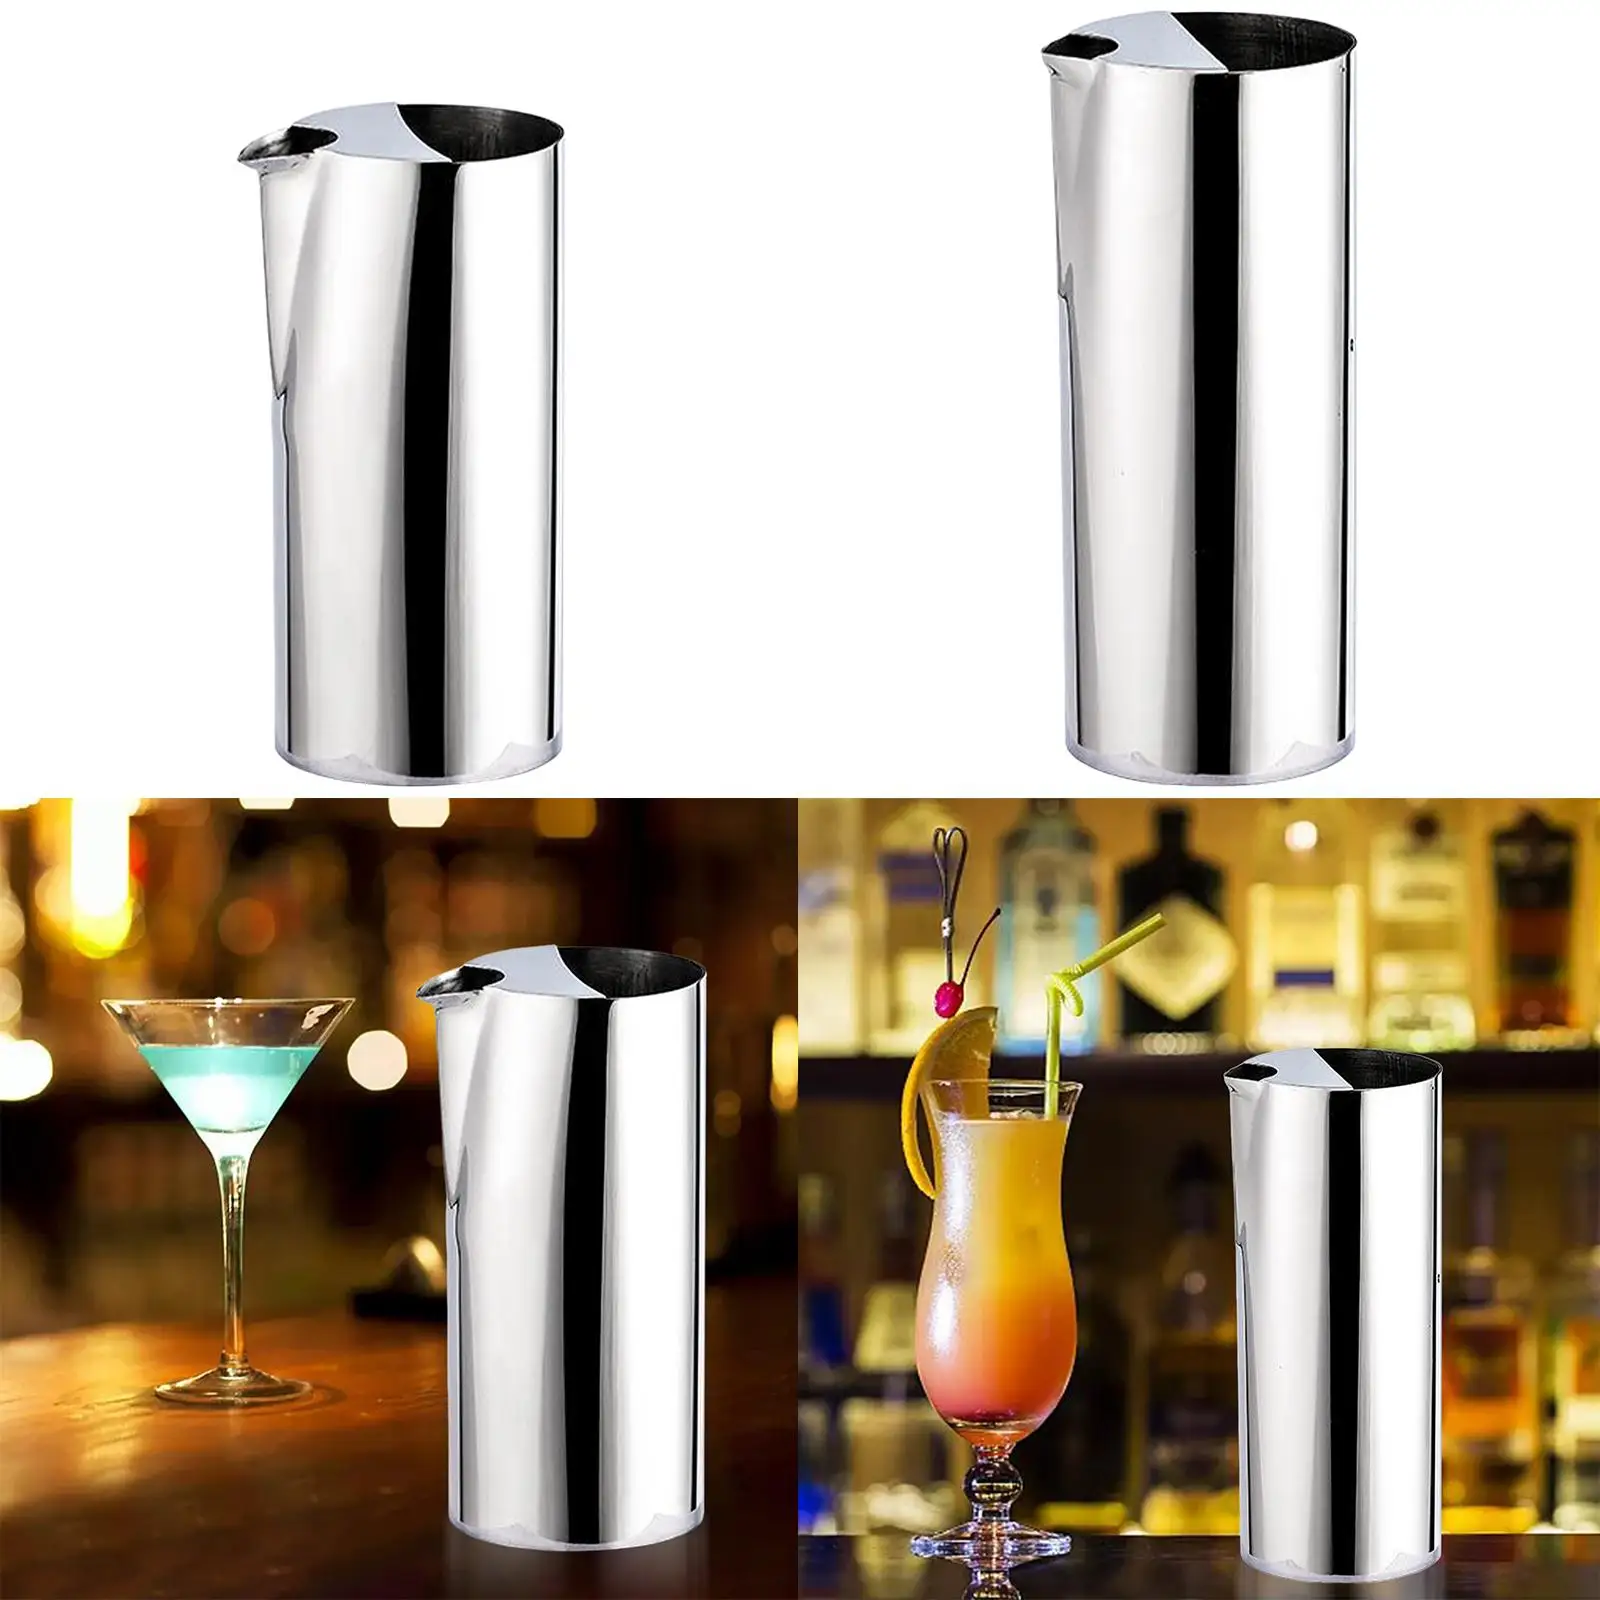 Large Capacity Wine Dispenser Wine Jug Kettle Cocktail Pot Cold Drinking Pitcher Water Pitcher Carafe for Home Hotel Bar Party